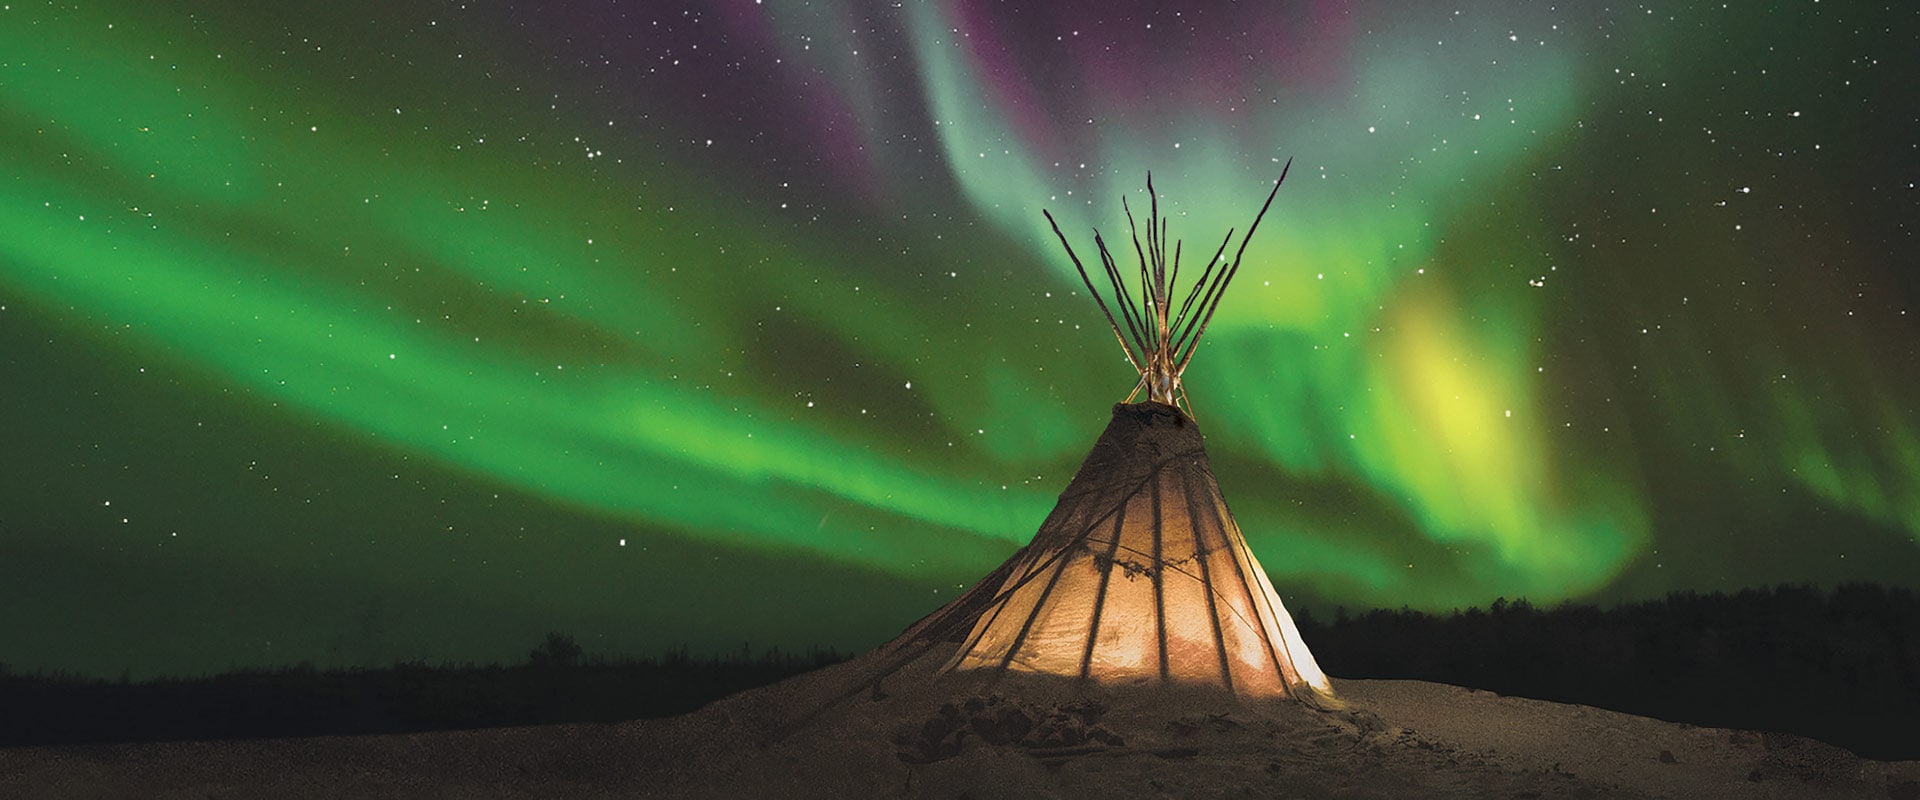 Teepee lit up under the Northern Lights